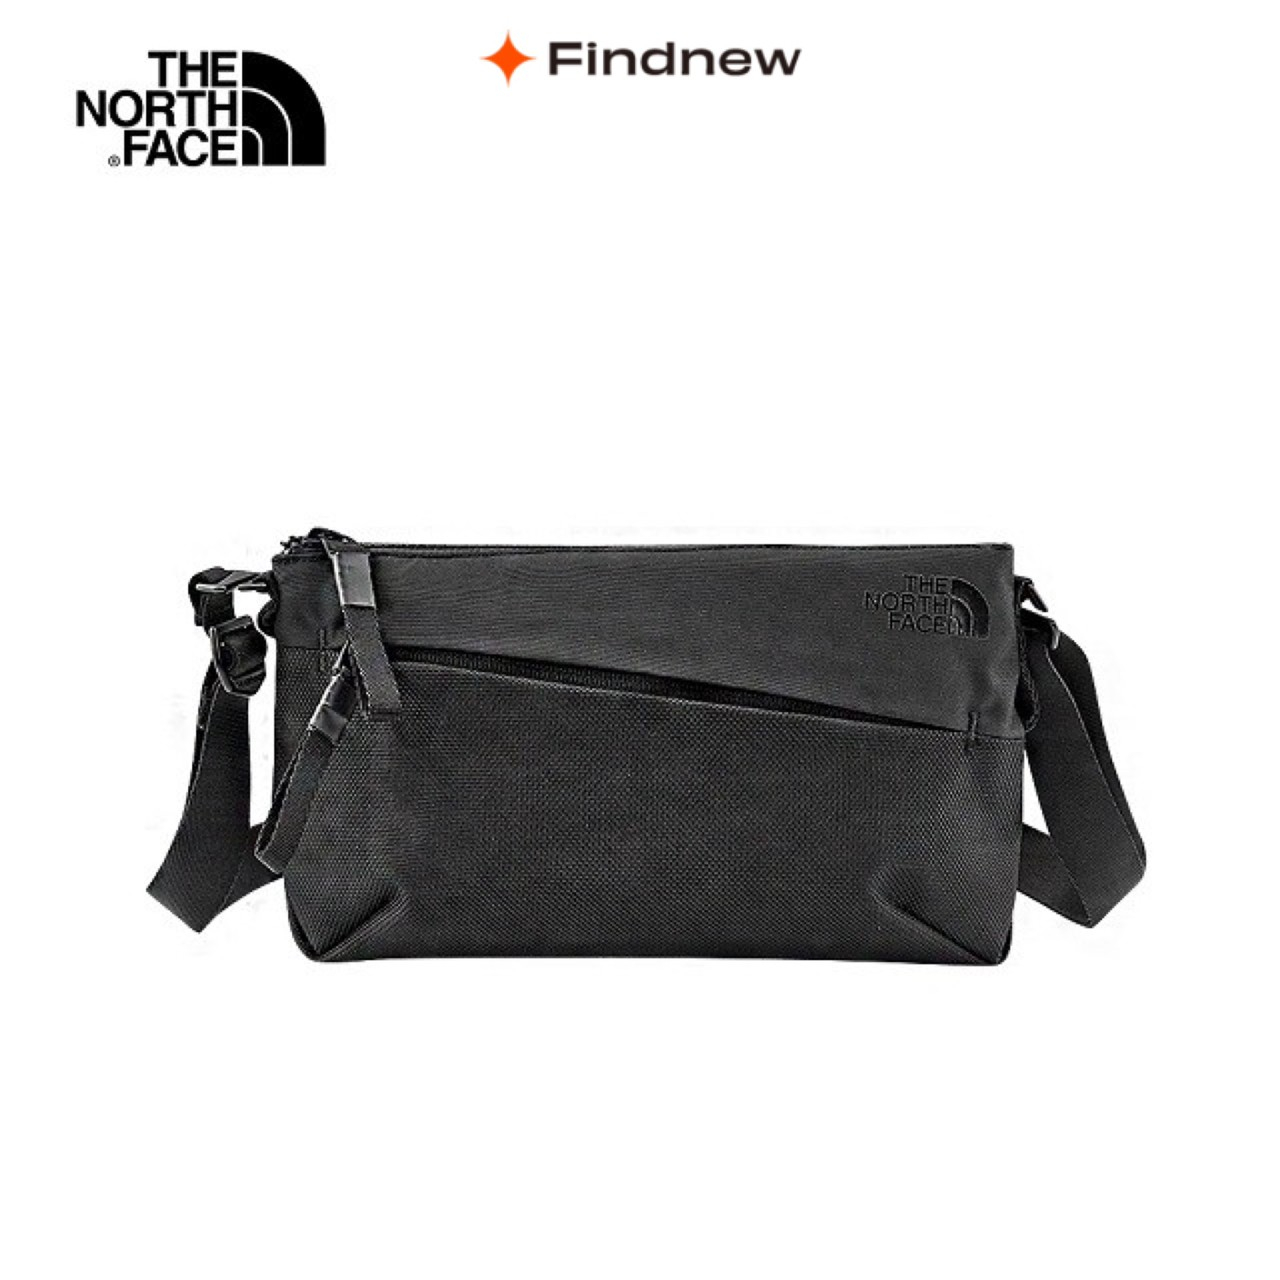 THE NORTH FACE 休閒單肩背包 NF0A3KWUKX7【Findnew】